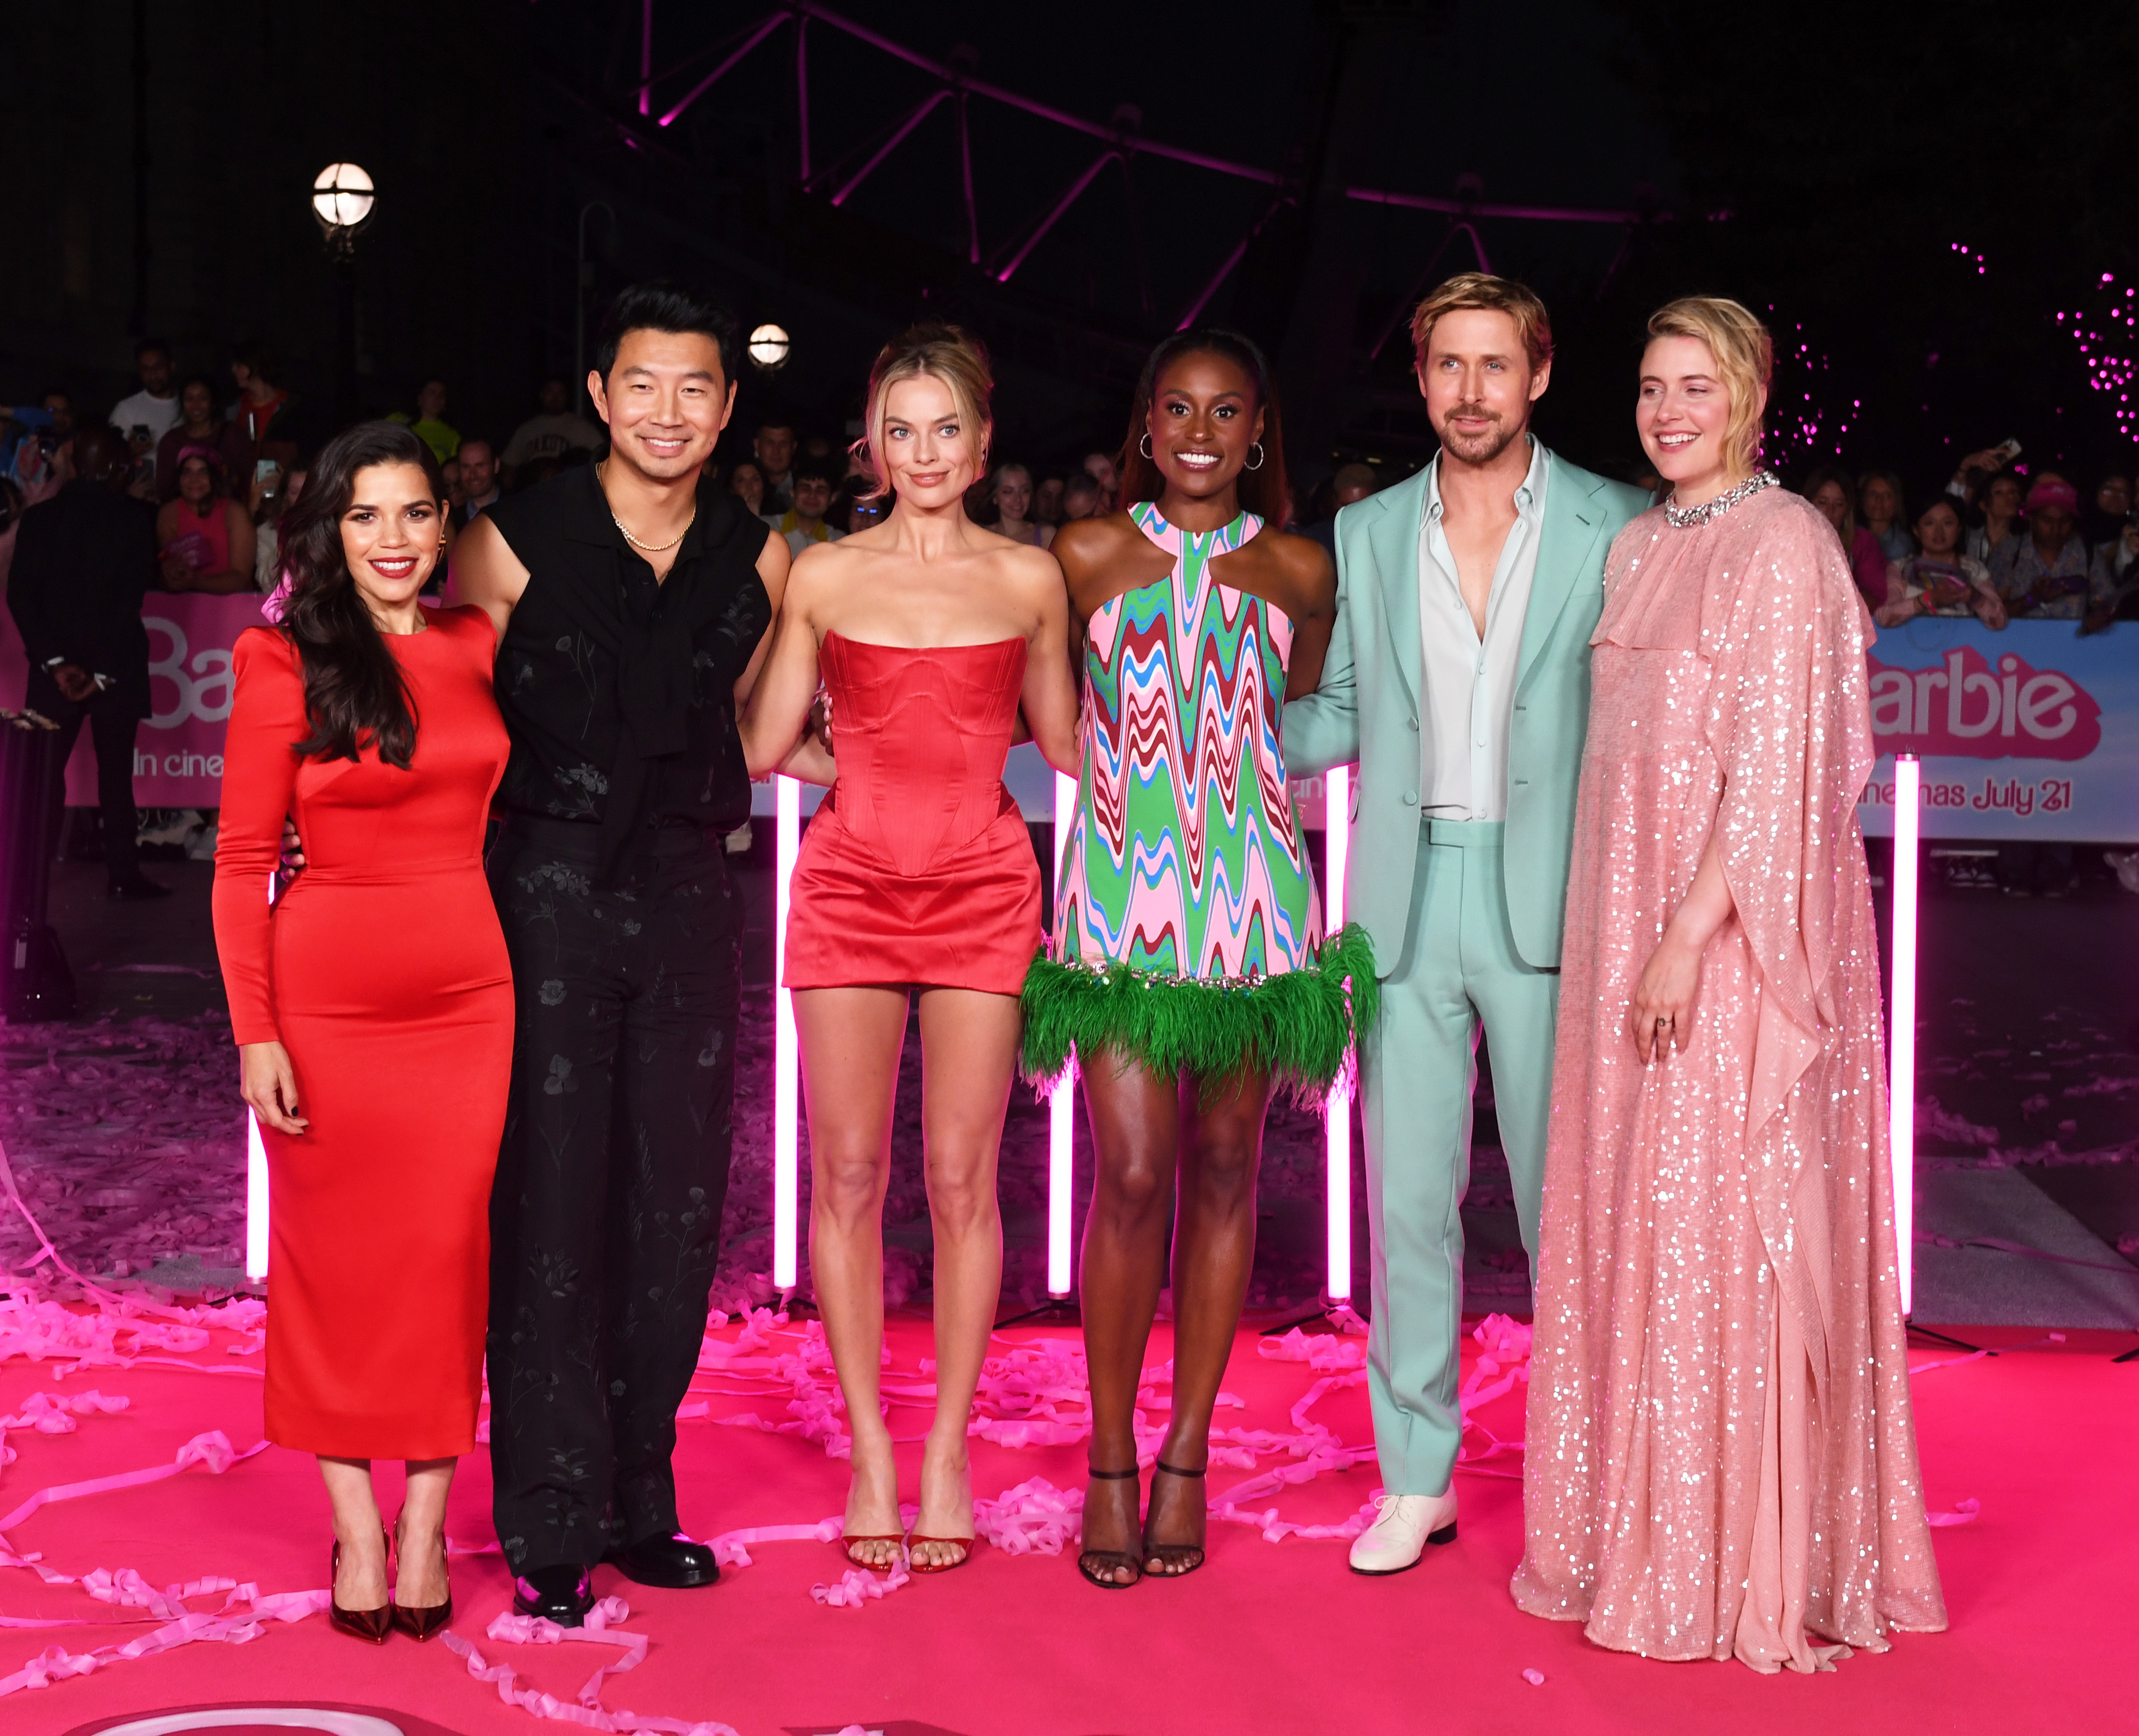 The cast of Barbie with director Greta Gerwig